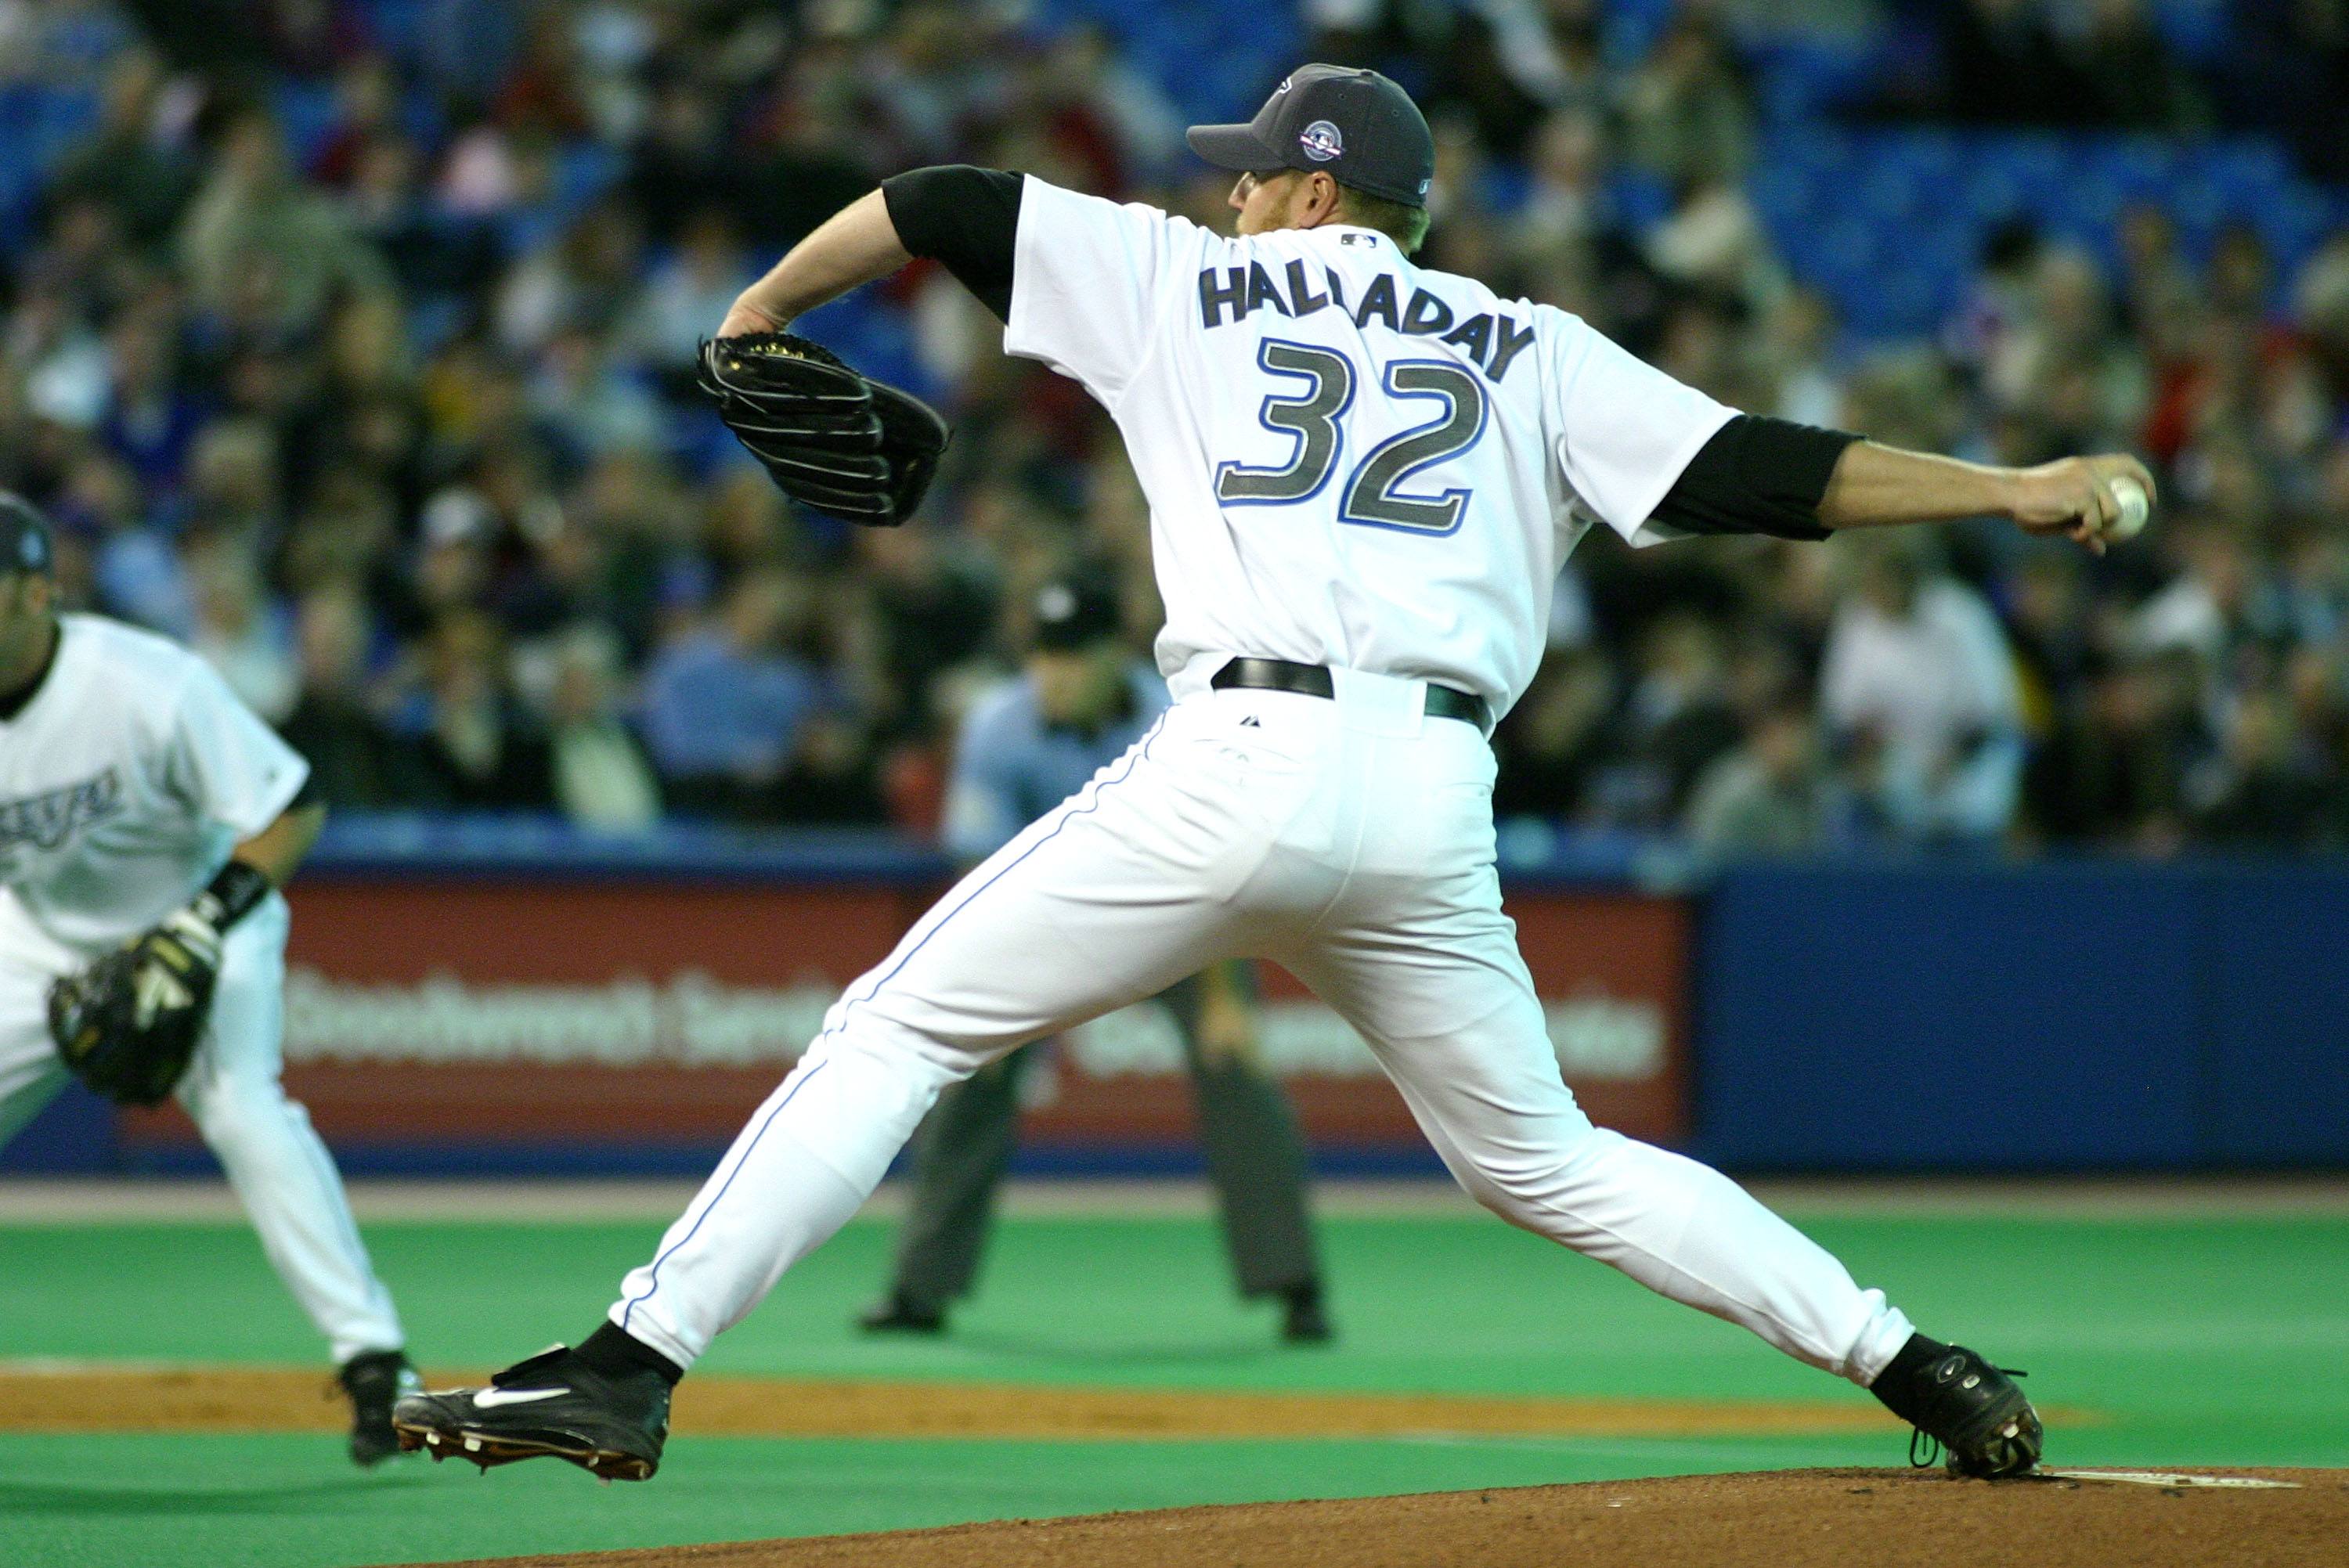 Roy Halladay at his best was Greg Maddux with more velocity.